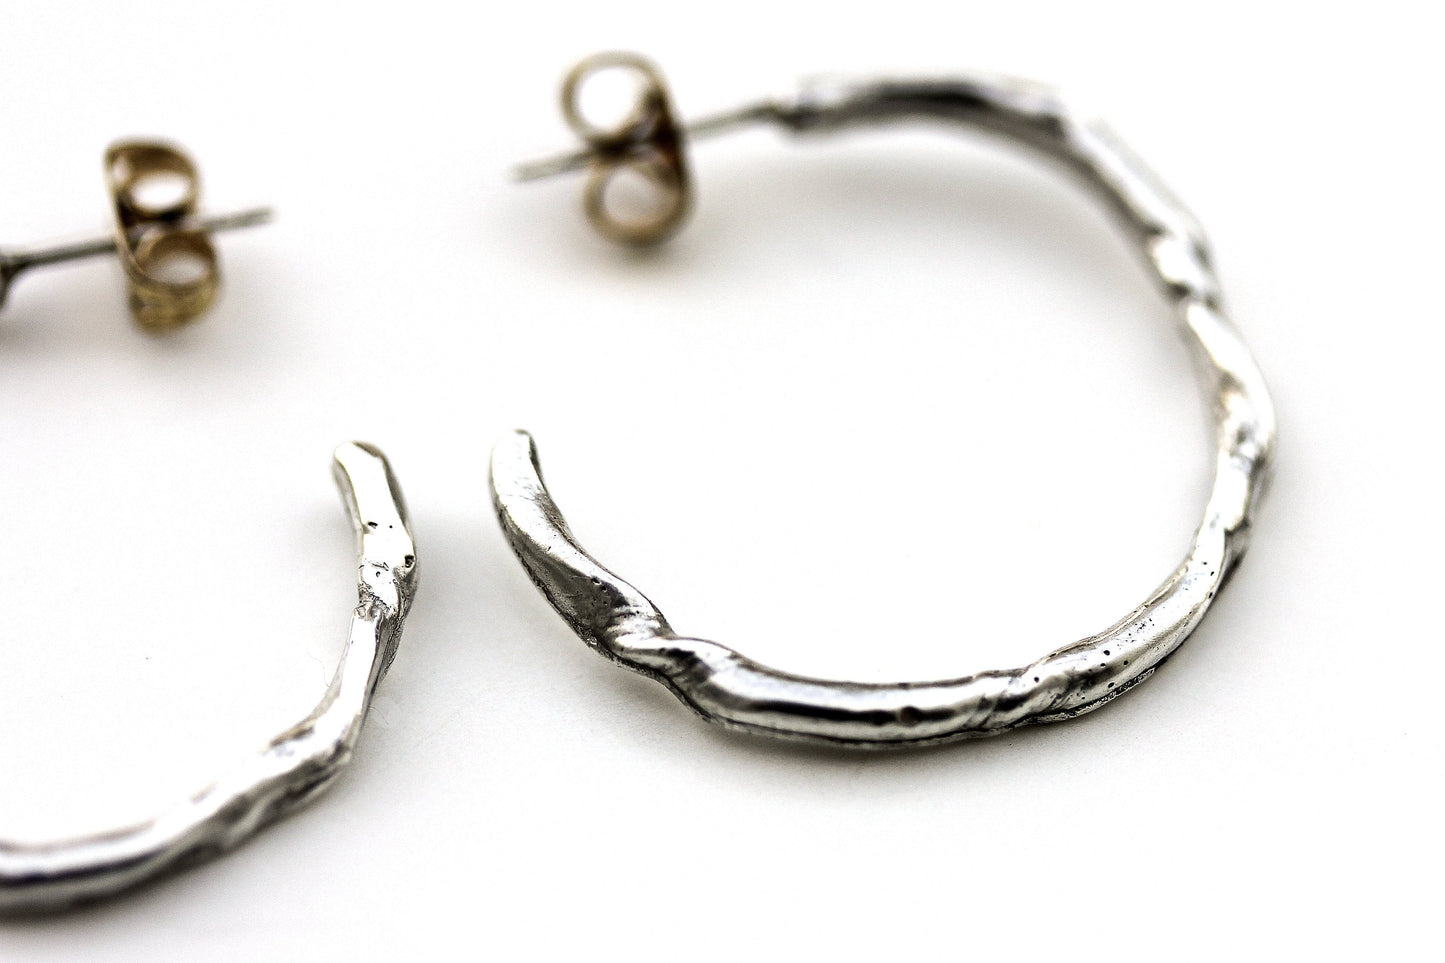 Detail photo of a silver hoop earring with an organic vine-like texture.